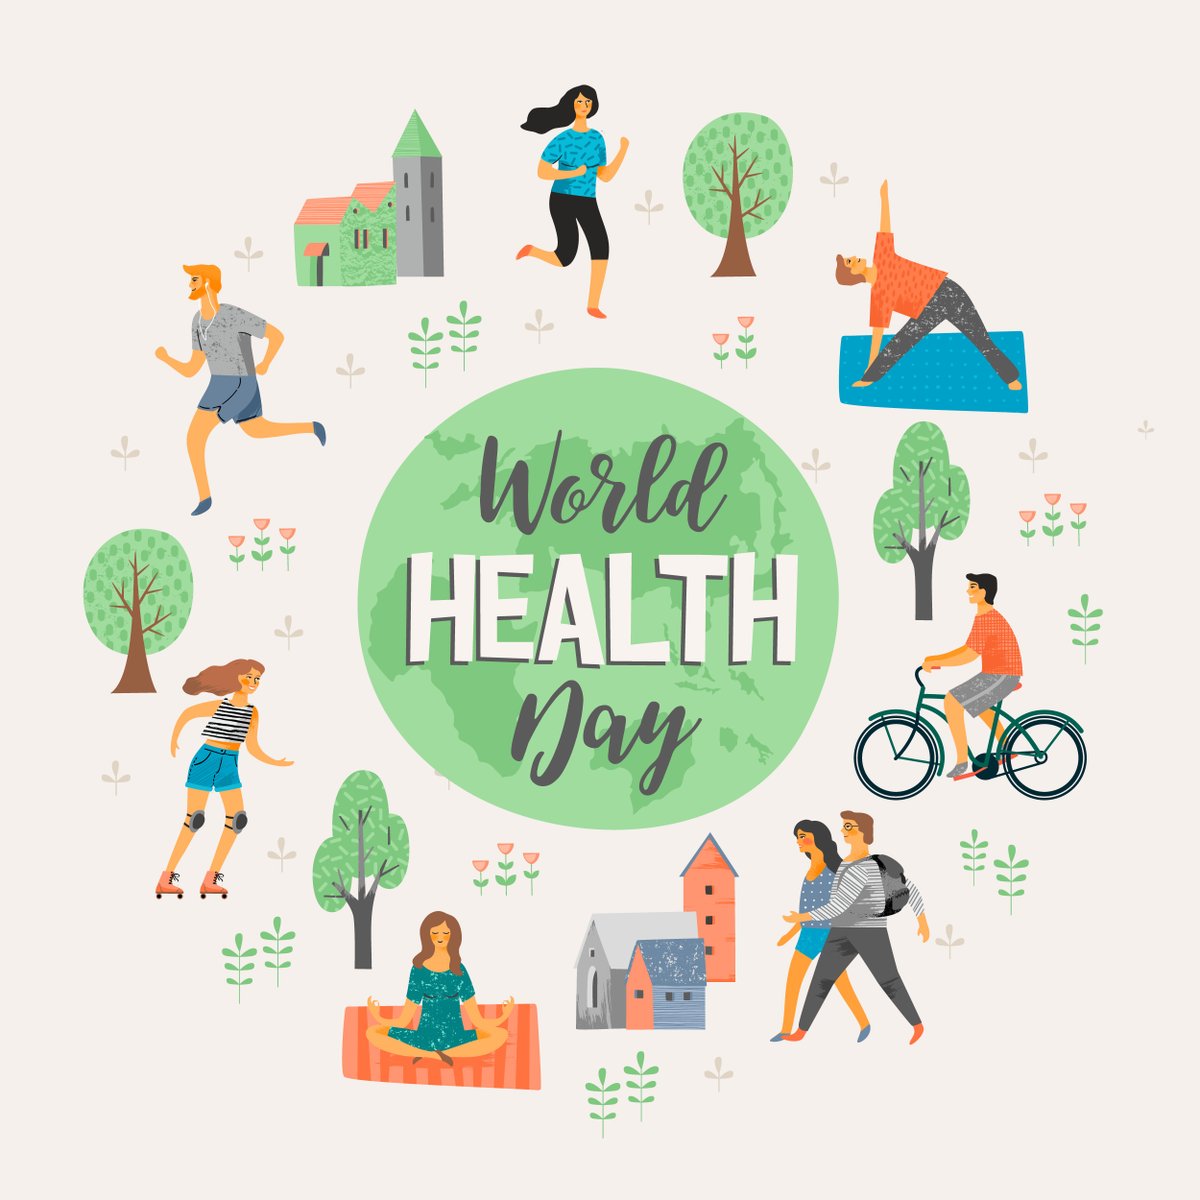 This #WorldHealthDay @WHO calls for us all to protect the basic human right to health. SSM Health is committed to better health for all in the communities we serve. Learn more about our work: bit.ly/4cEAUAu